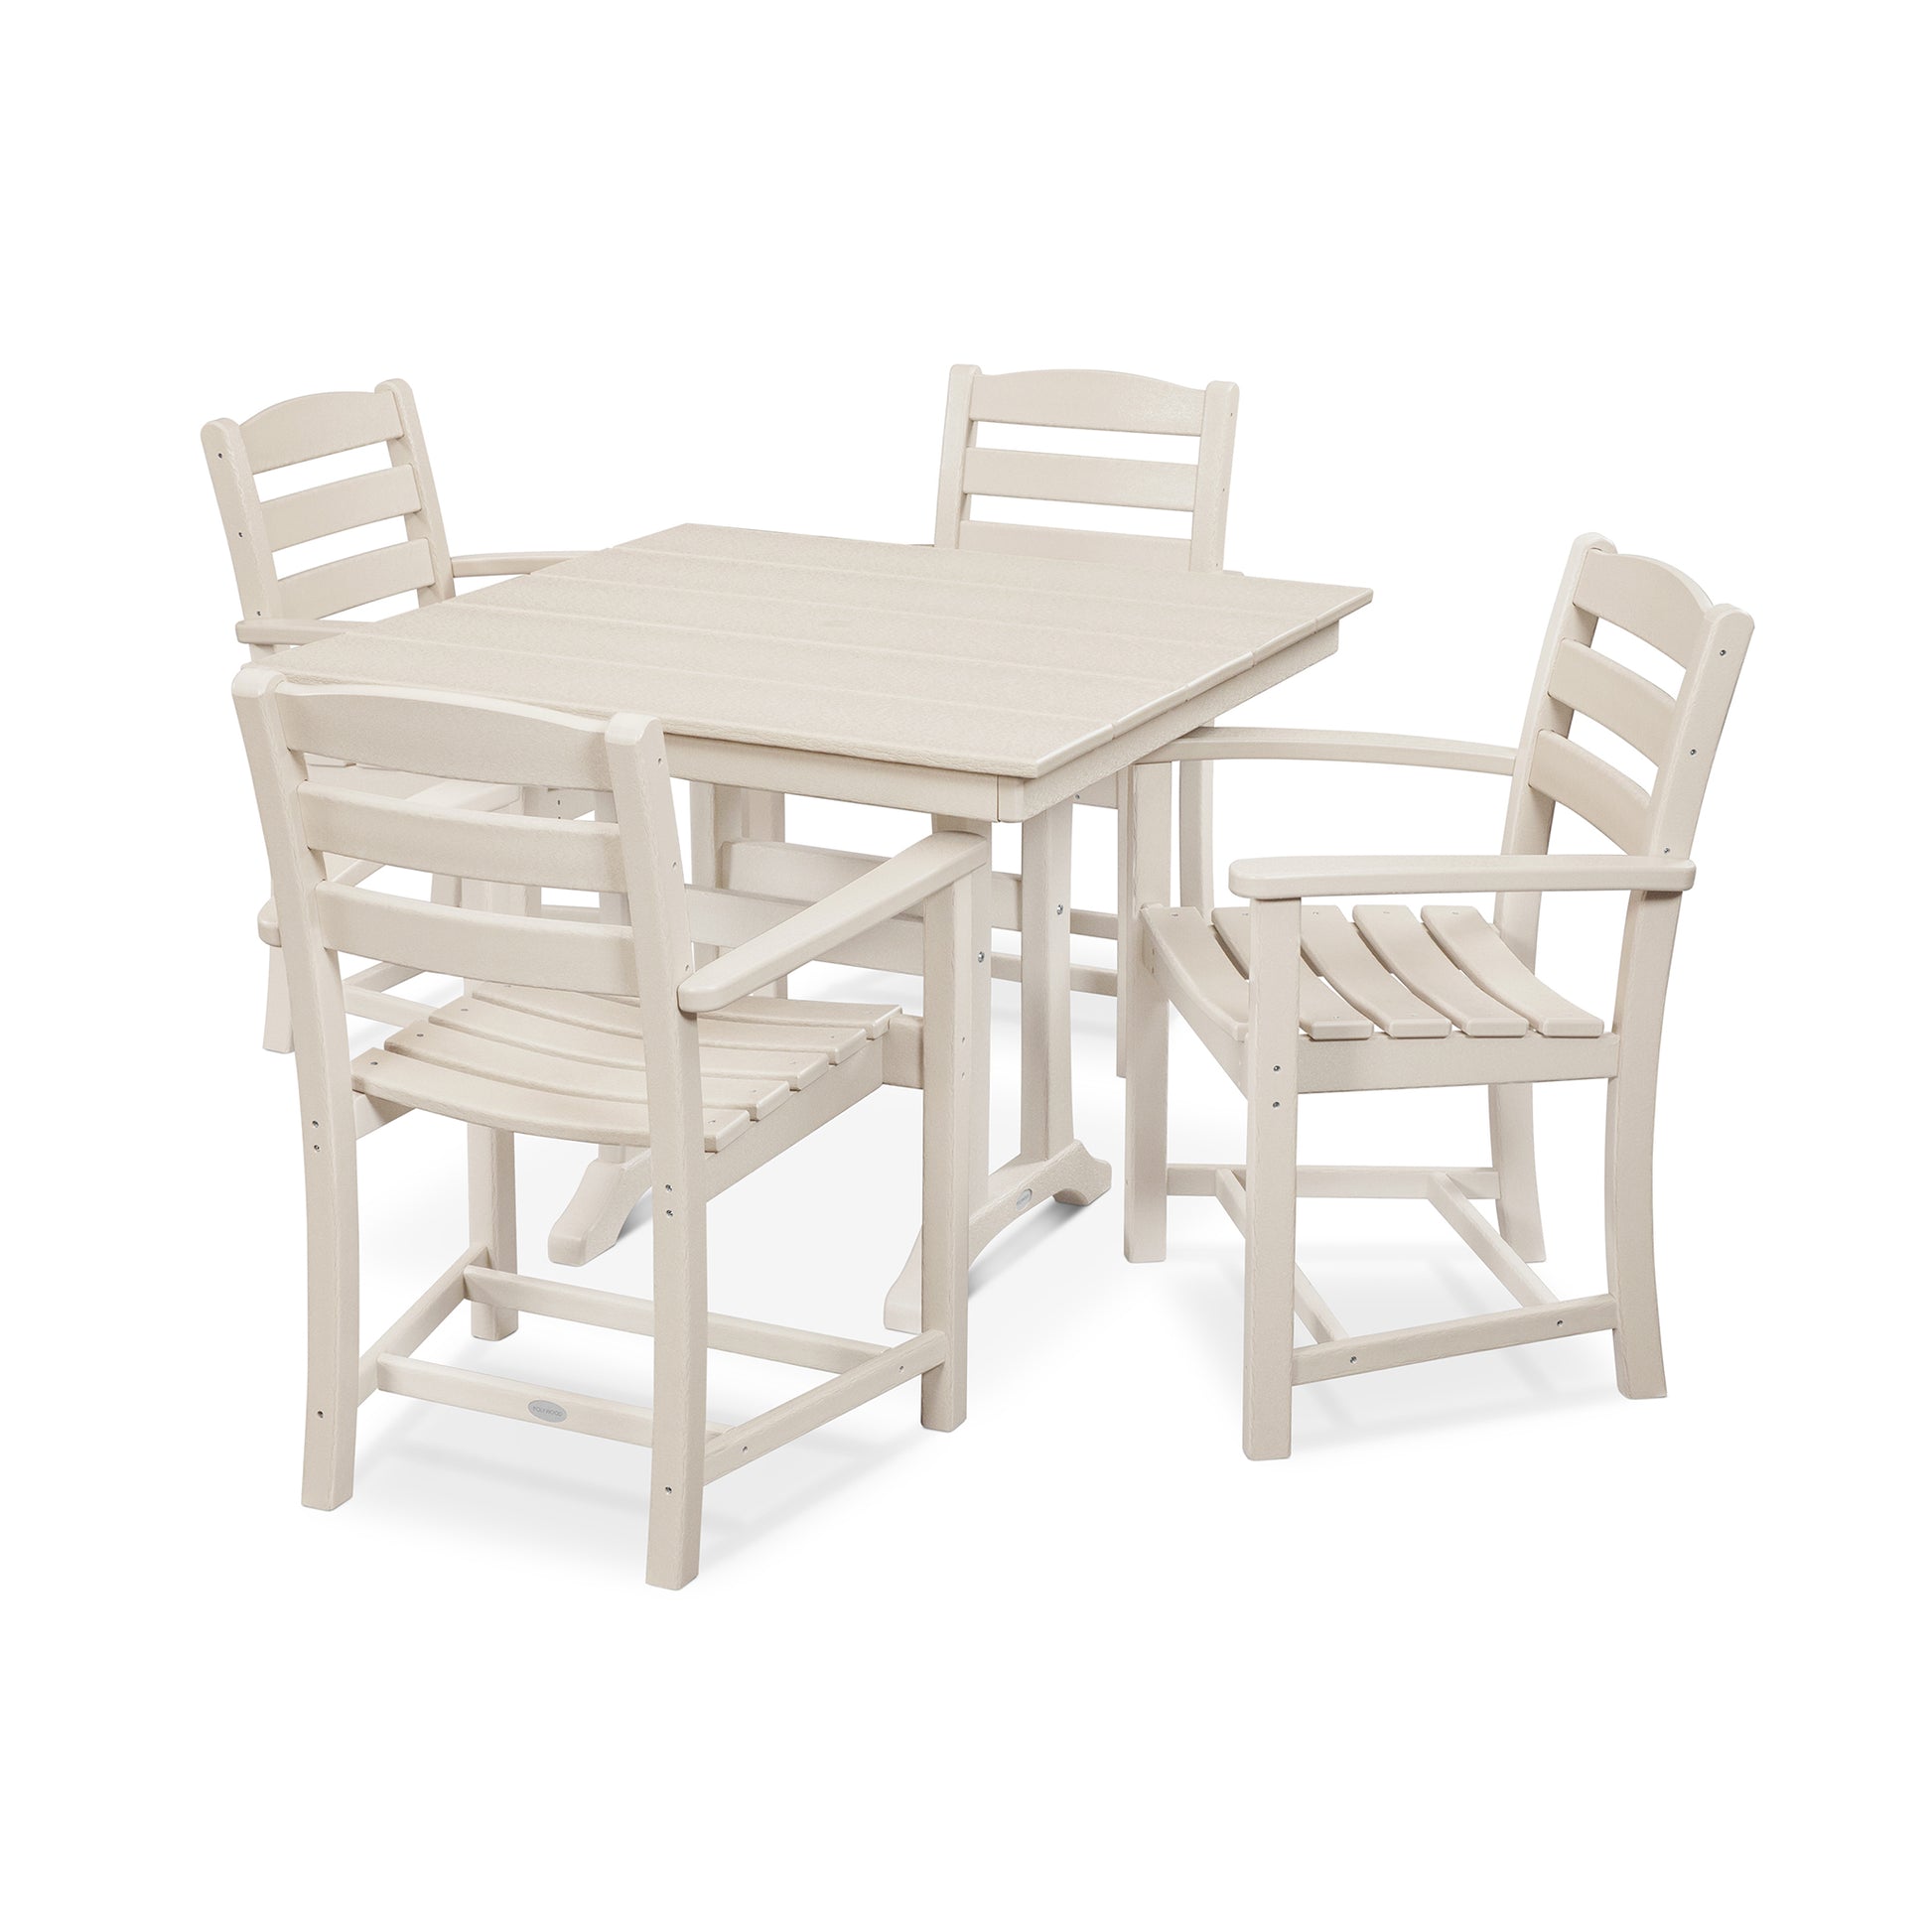 A white POLYWOOD La Casa Cafe 5-Piece Farmhouse Trestle Arm Chair Dining Set consisting of a square table and four matching chairs made of synthetic materials, displayed against a plain white background.